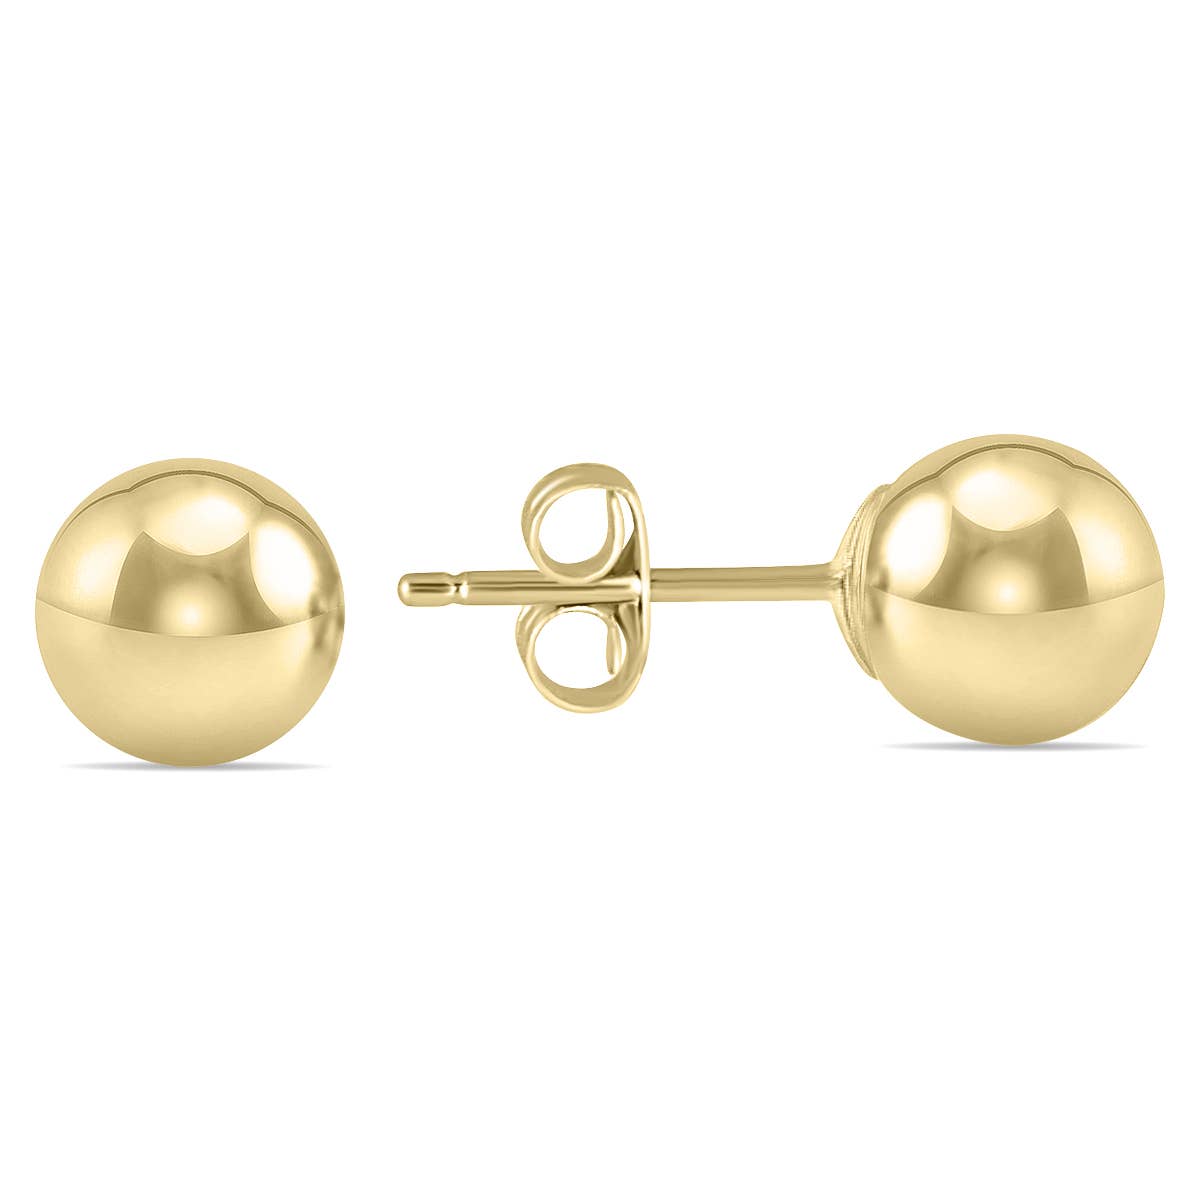 6MM 14K Yellow Gold Filled Round Ball Earrings